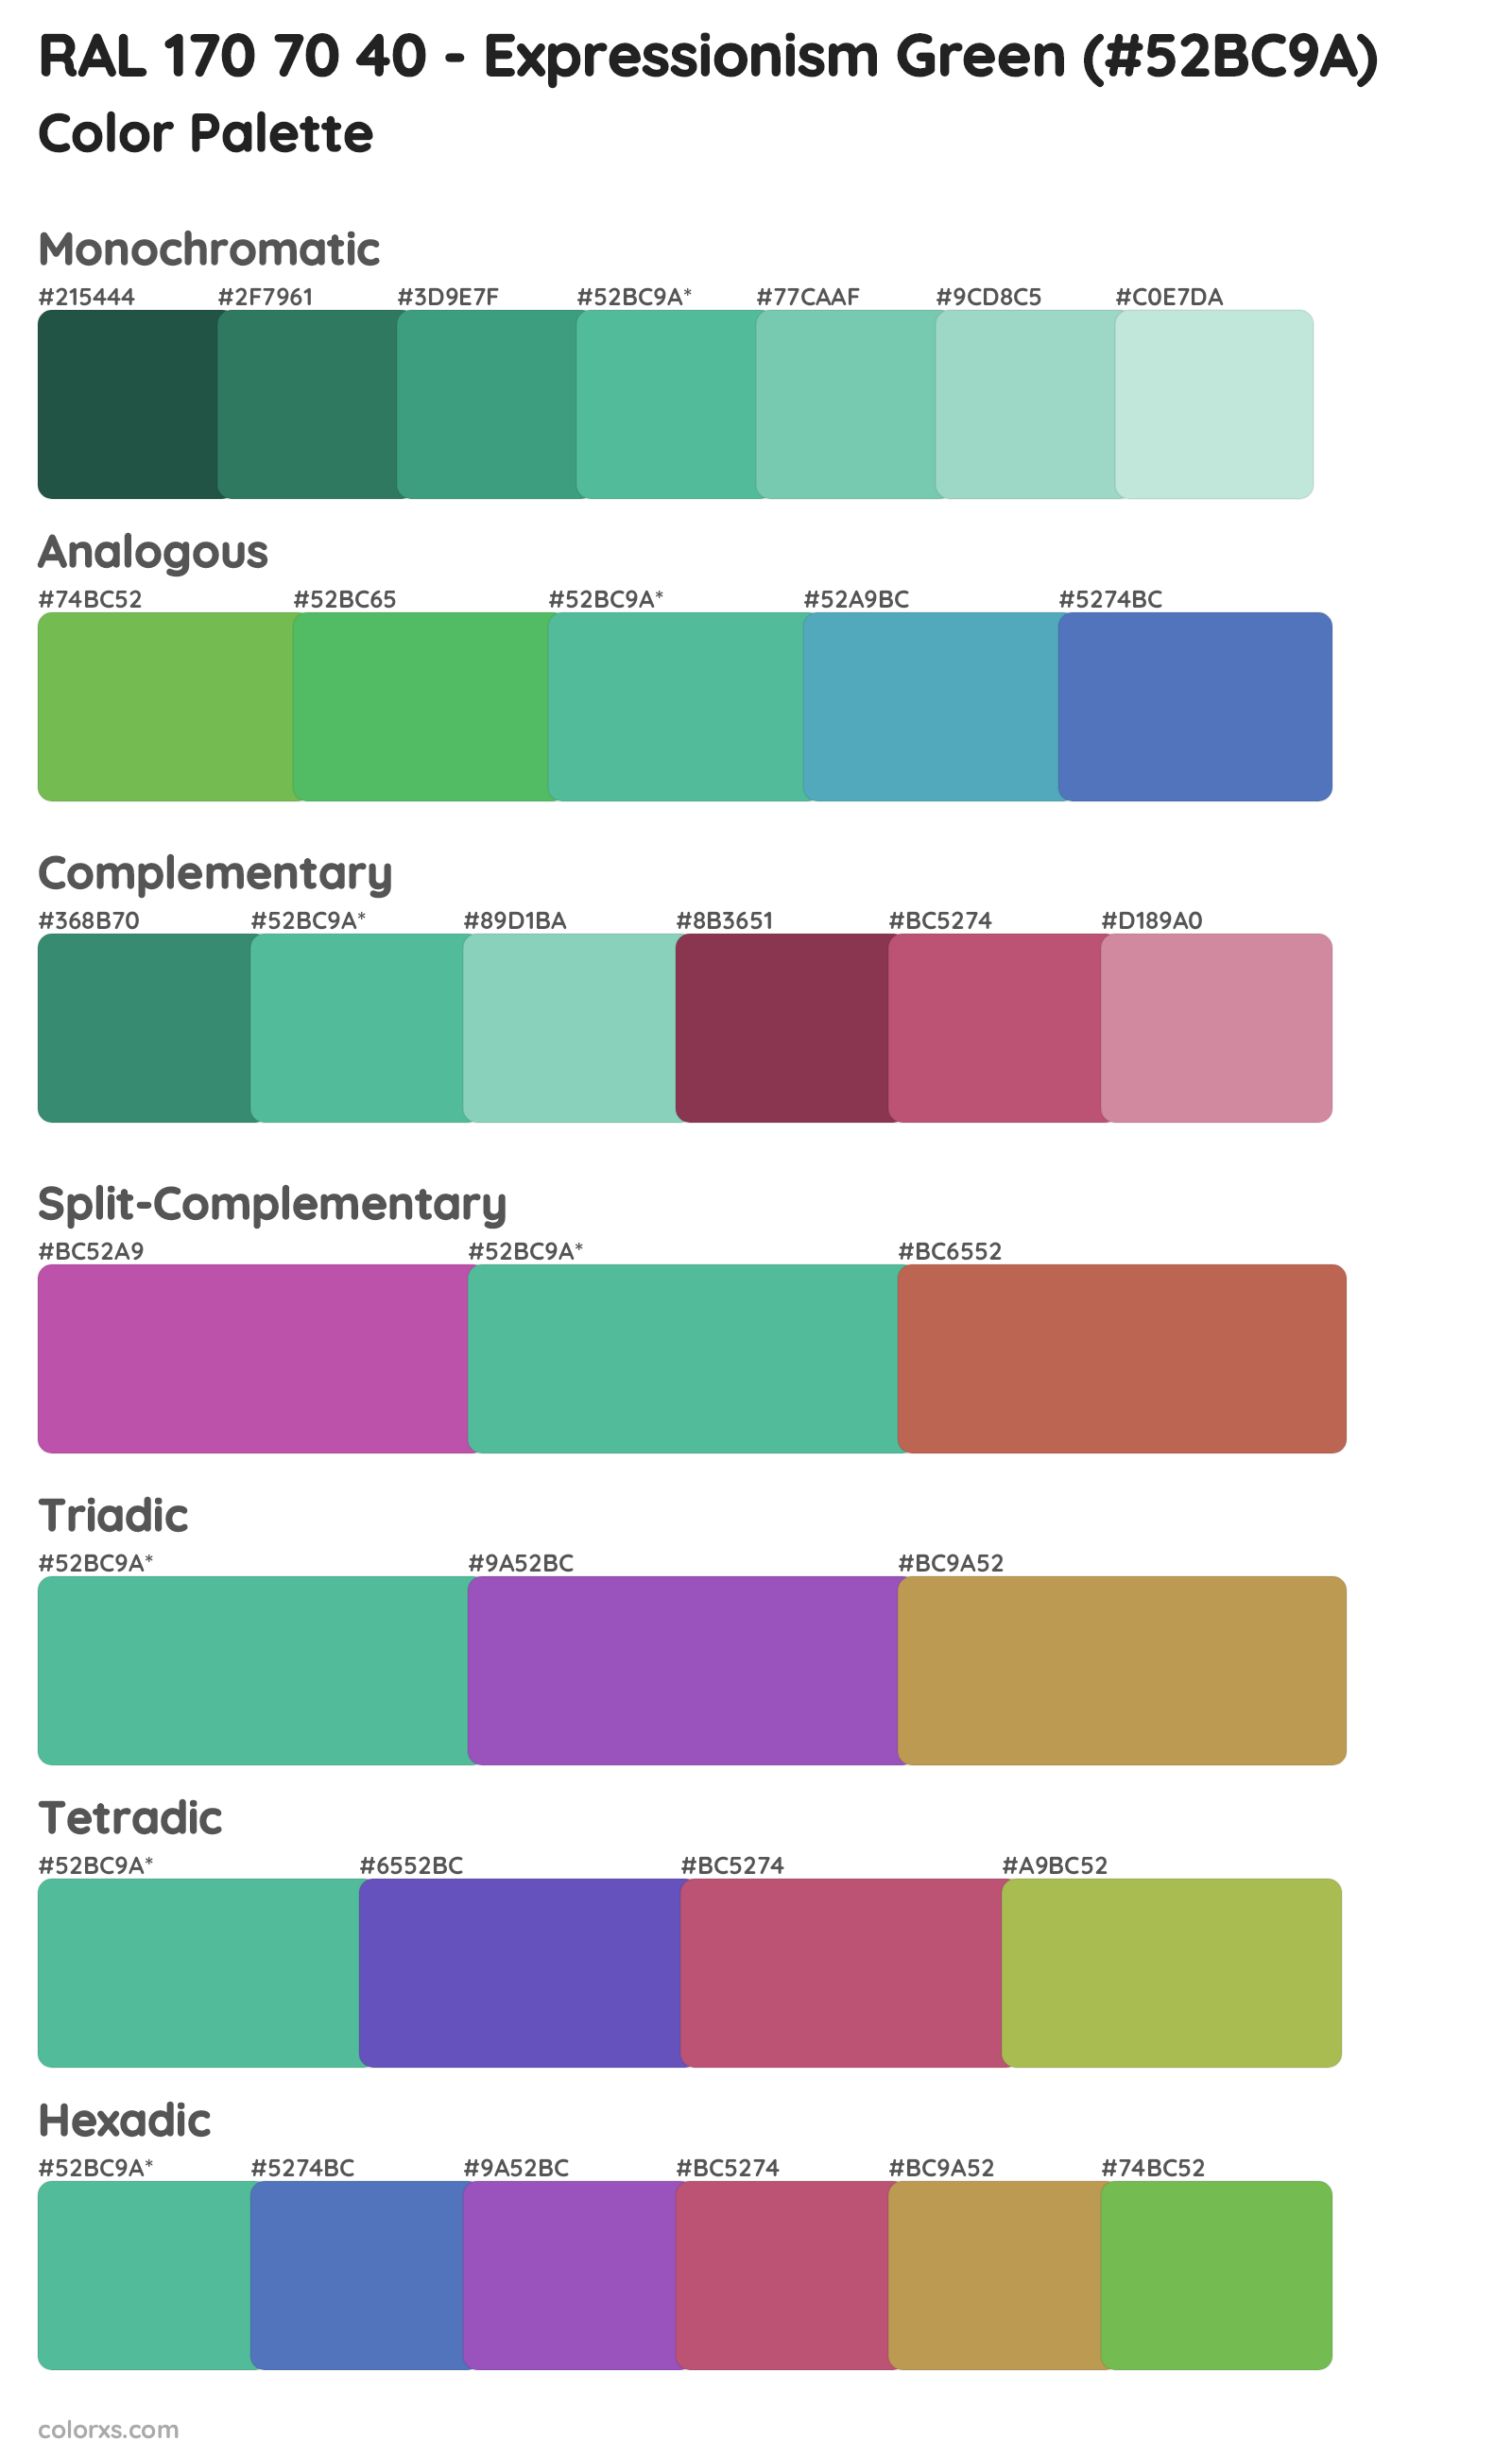 RAL 170 70 40 - Expressionism Green Color Scheme Palettes